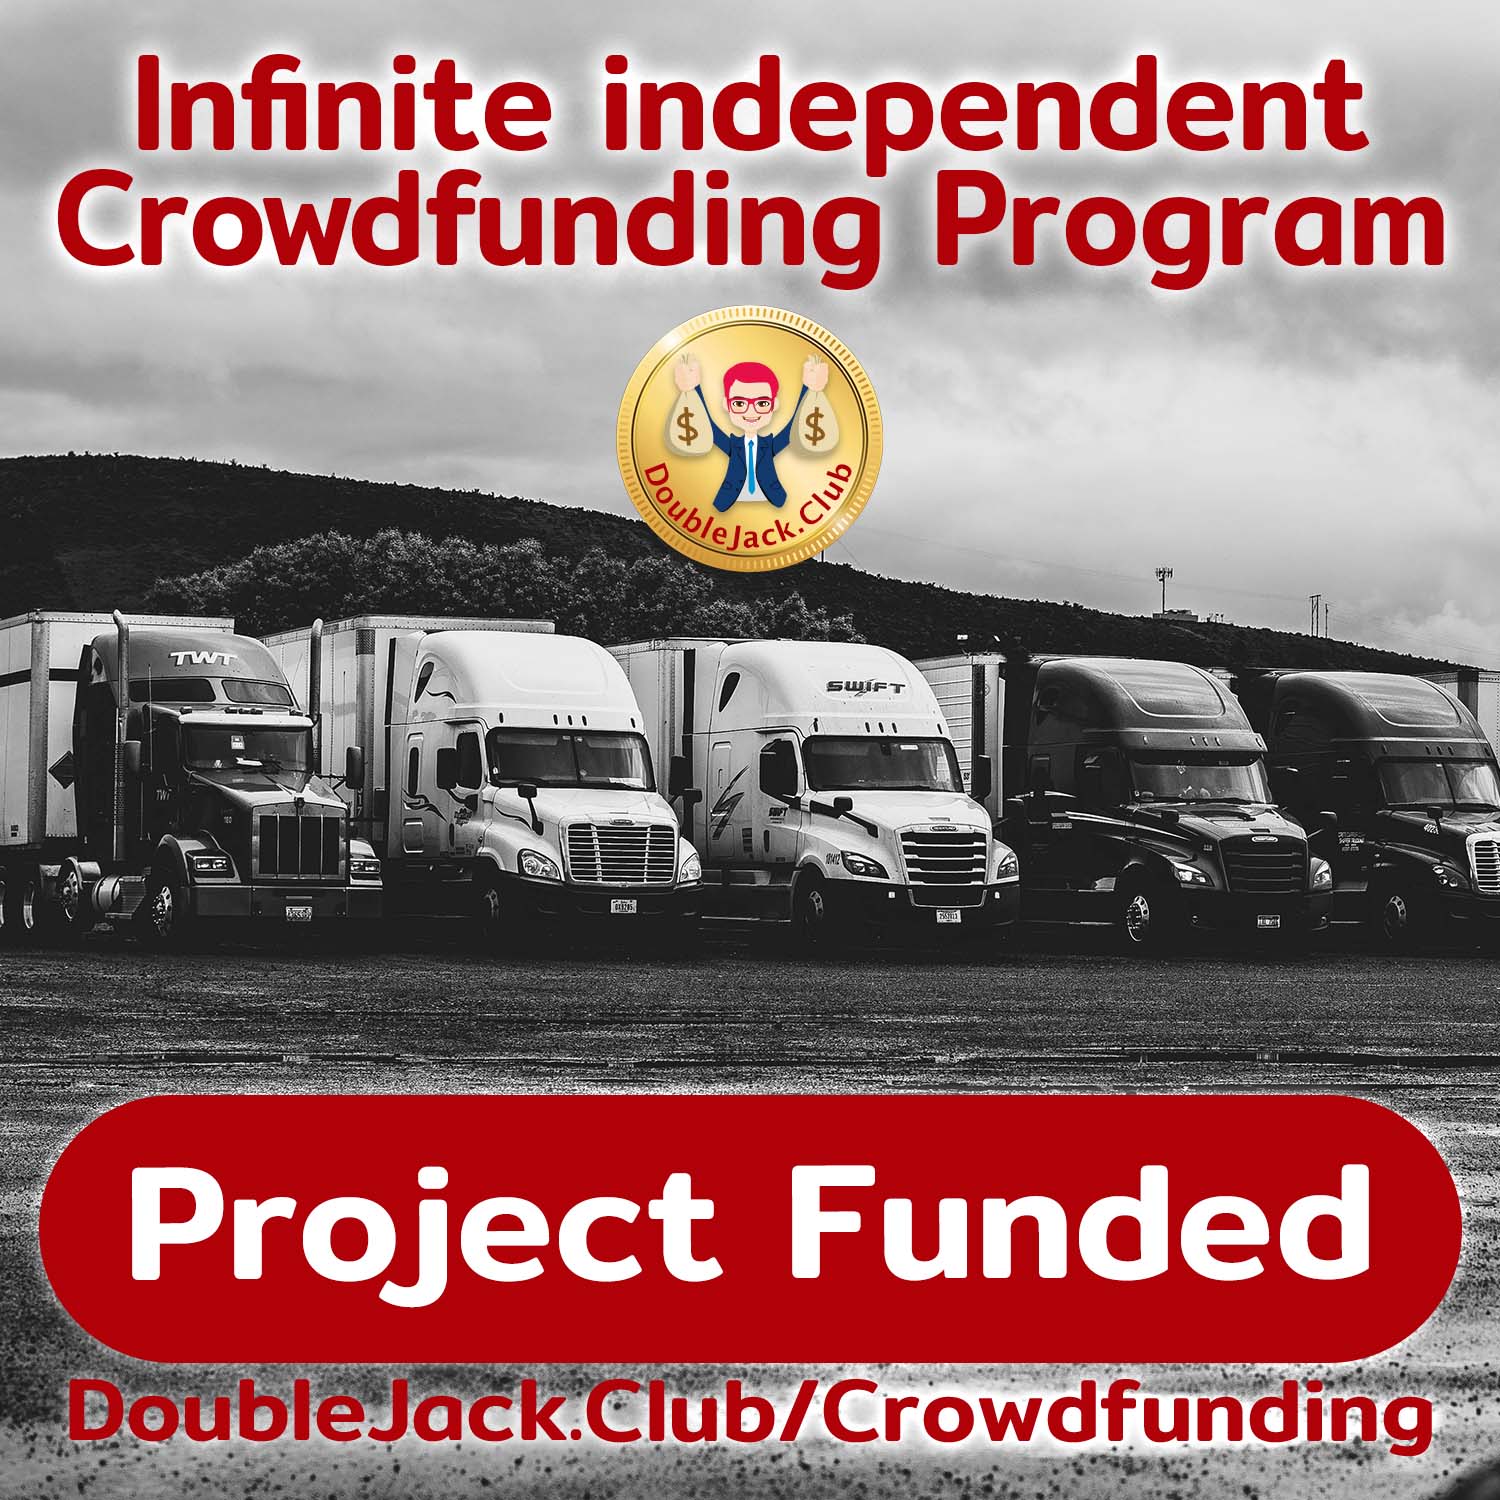 Doublejack.club Infinite funding for your projects.